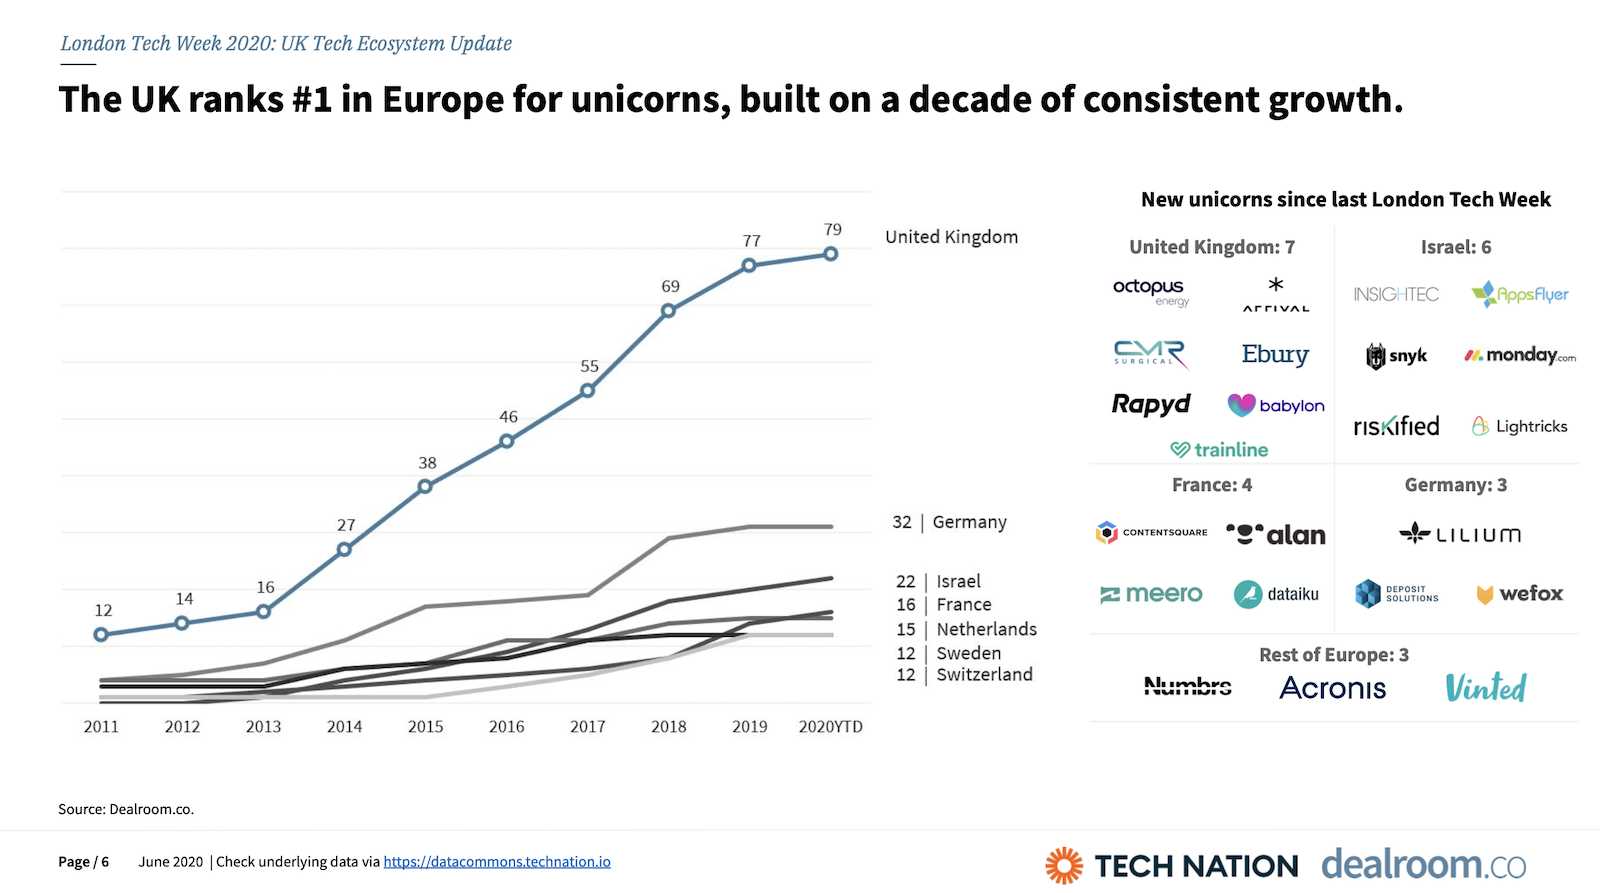  The UK ranks #1 in Europe for unicorns, built on a decade of consistent growth.